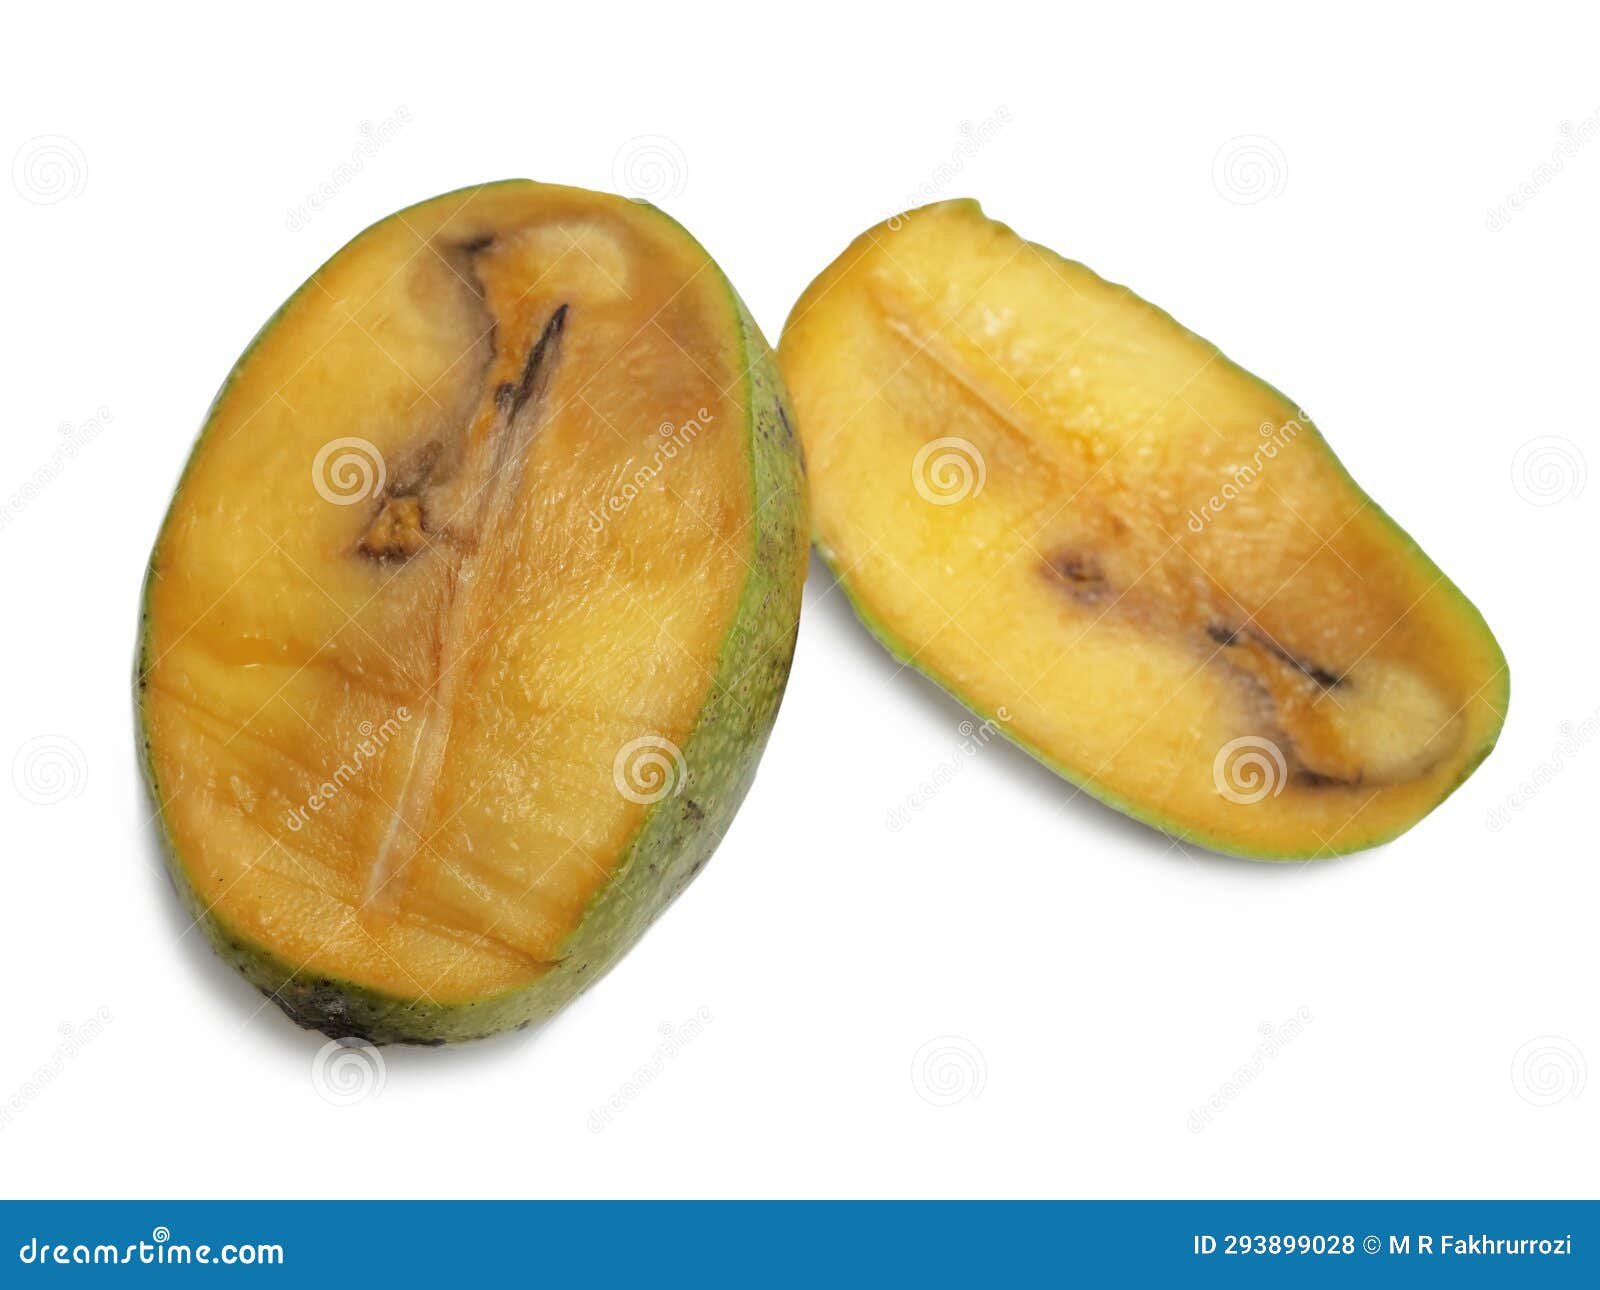 Top View Rotten Mango with Worms on White Background Stock Image - Image of  putrid, hole: 273503067